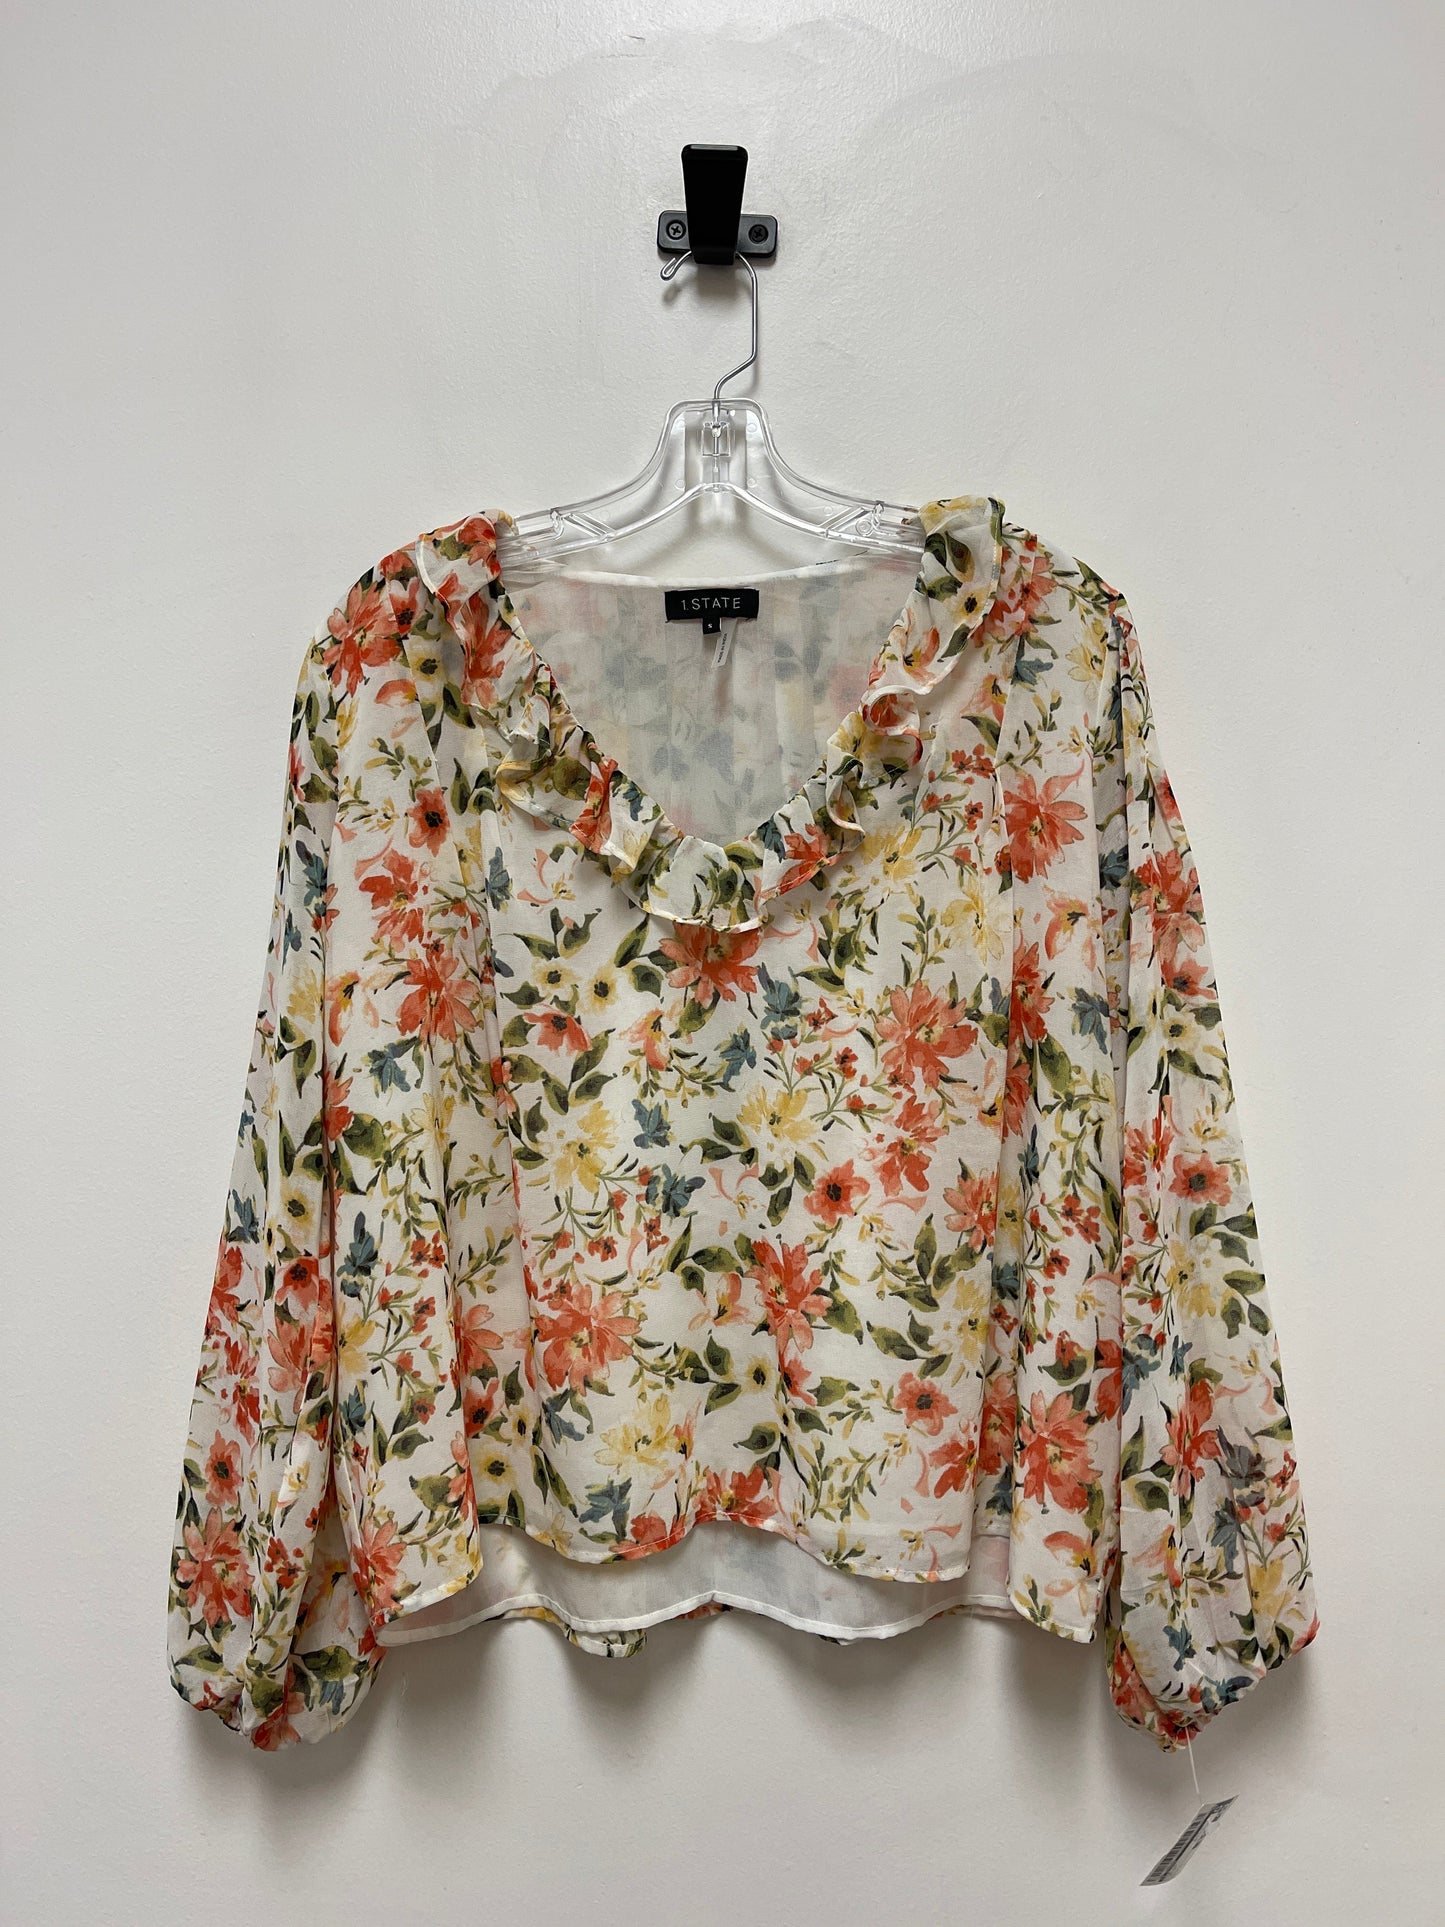 Cream Top Long Sleeve 1.state, Size S